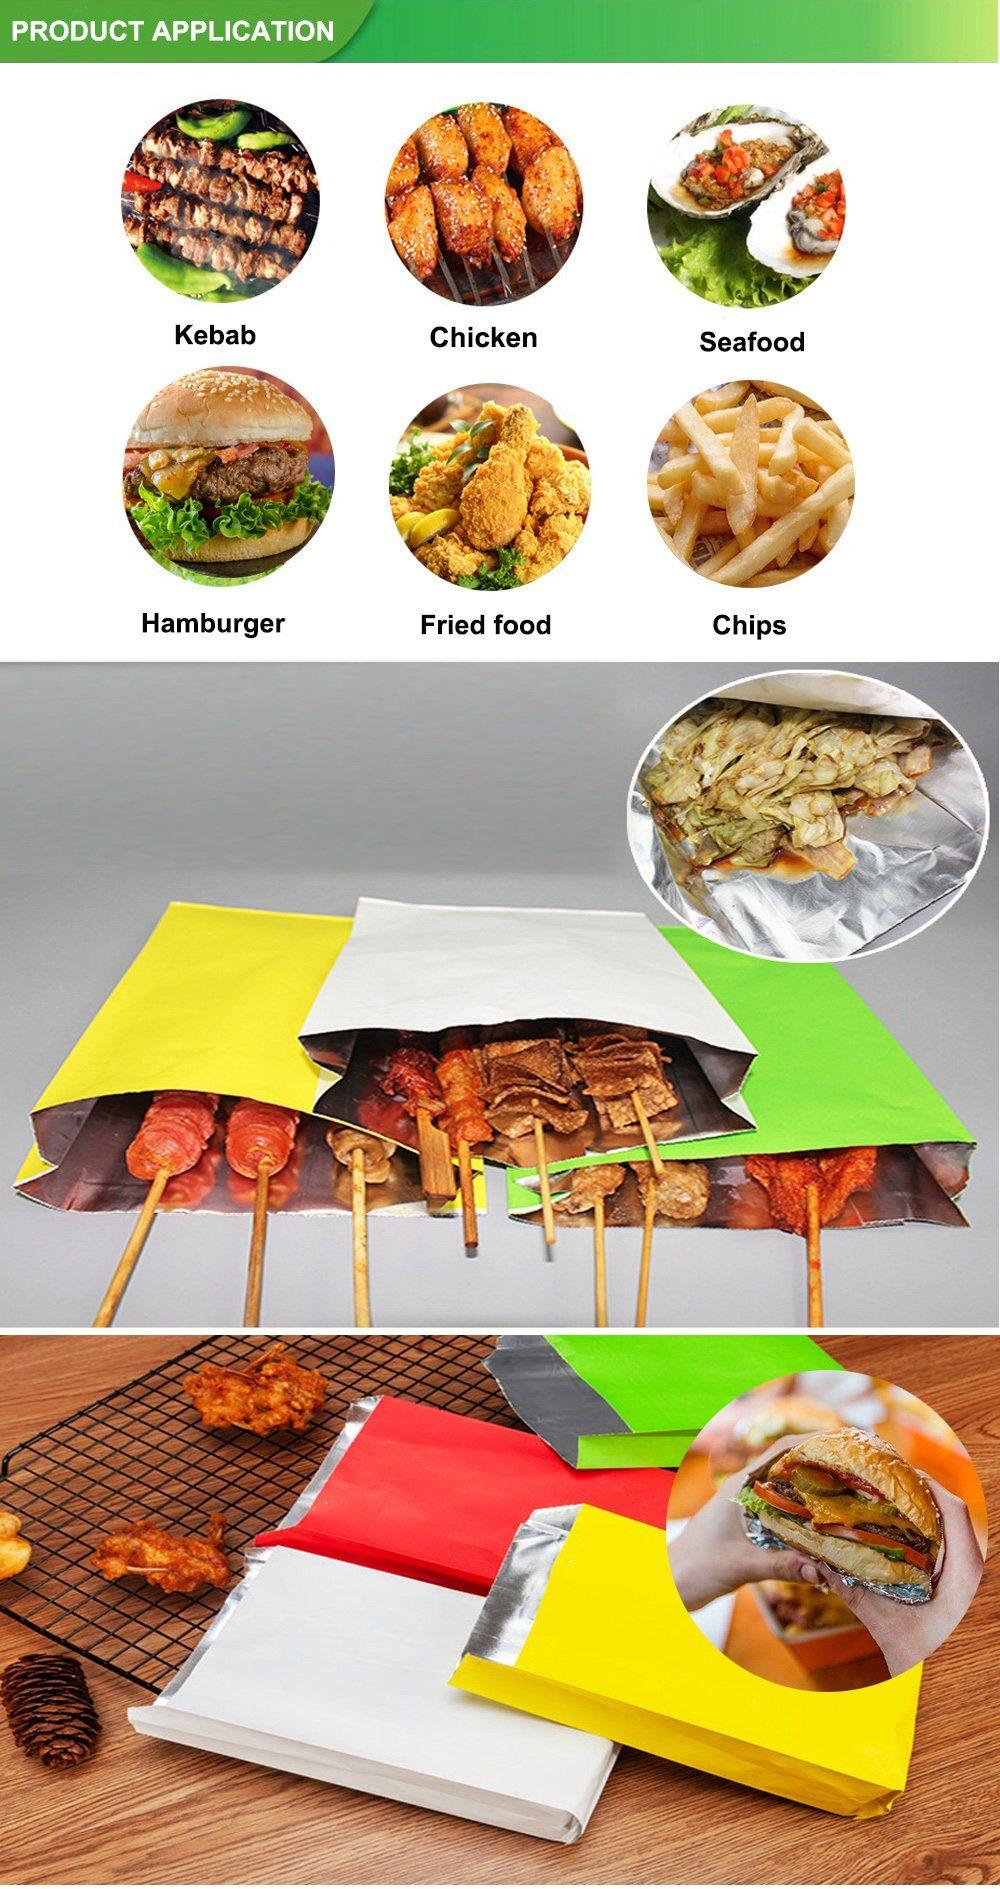 Chicken Lined Food Bag Aluminum Foil Bags for Grilling